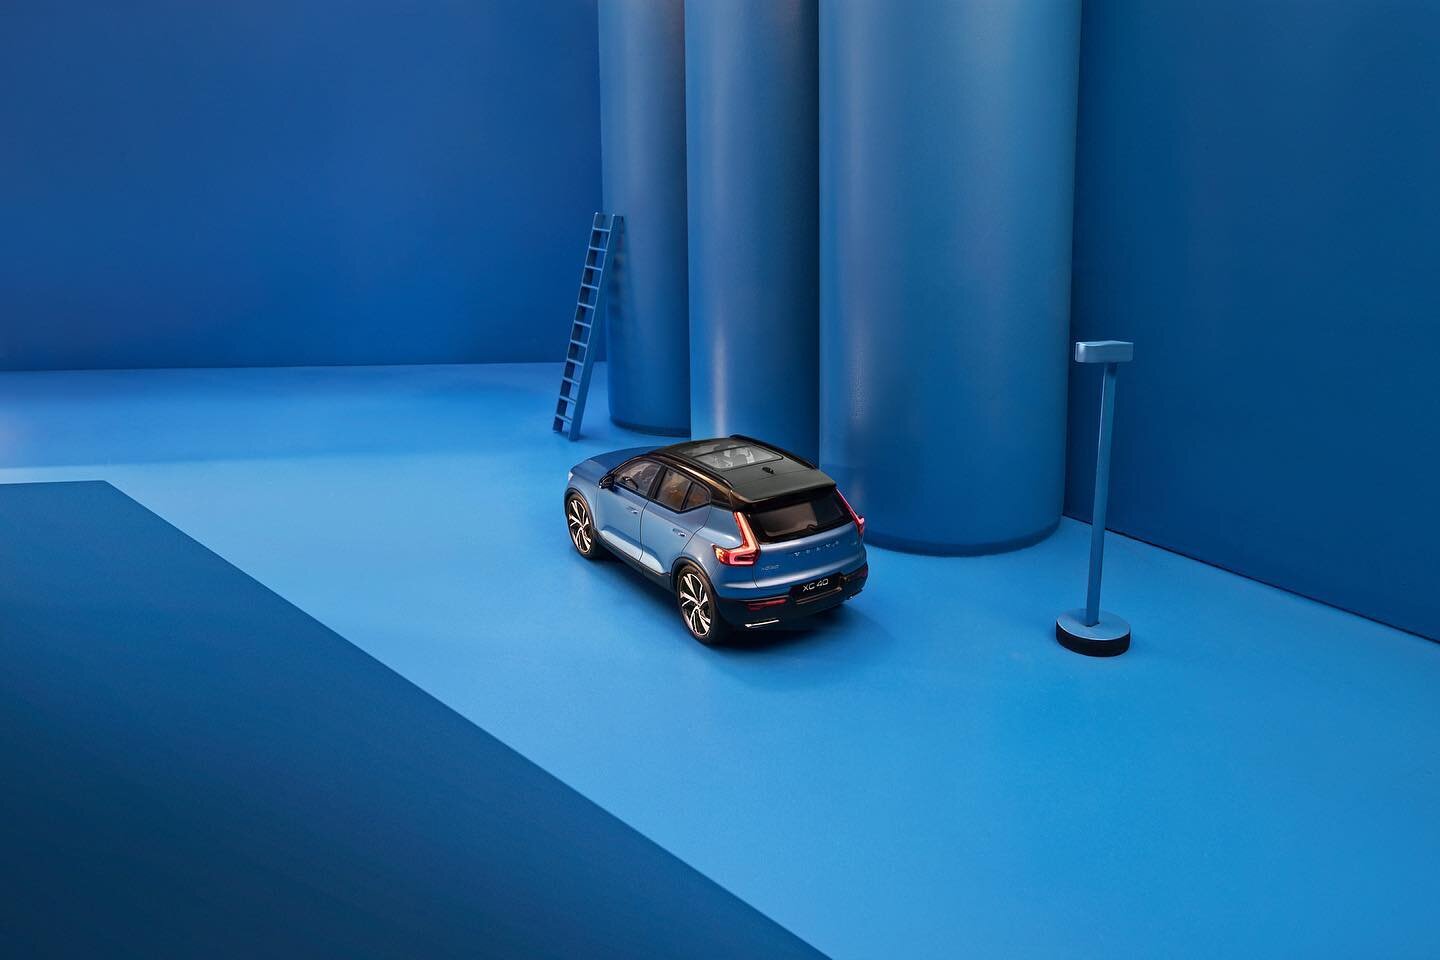 ⚠️I !recreated! a new press image by @volvocars with their official toy car. 🤏😄

➡️ SWIPE for BTS

Scale: 1:43 😅
This is the smallest car I have worked with so far!

#volvo #cars #volvocars #volvoxc40 #miniature #photography #photographer #work #s